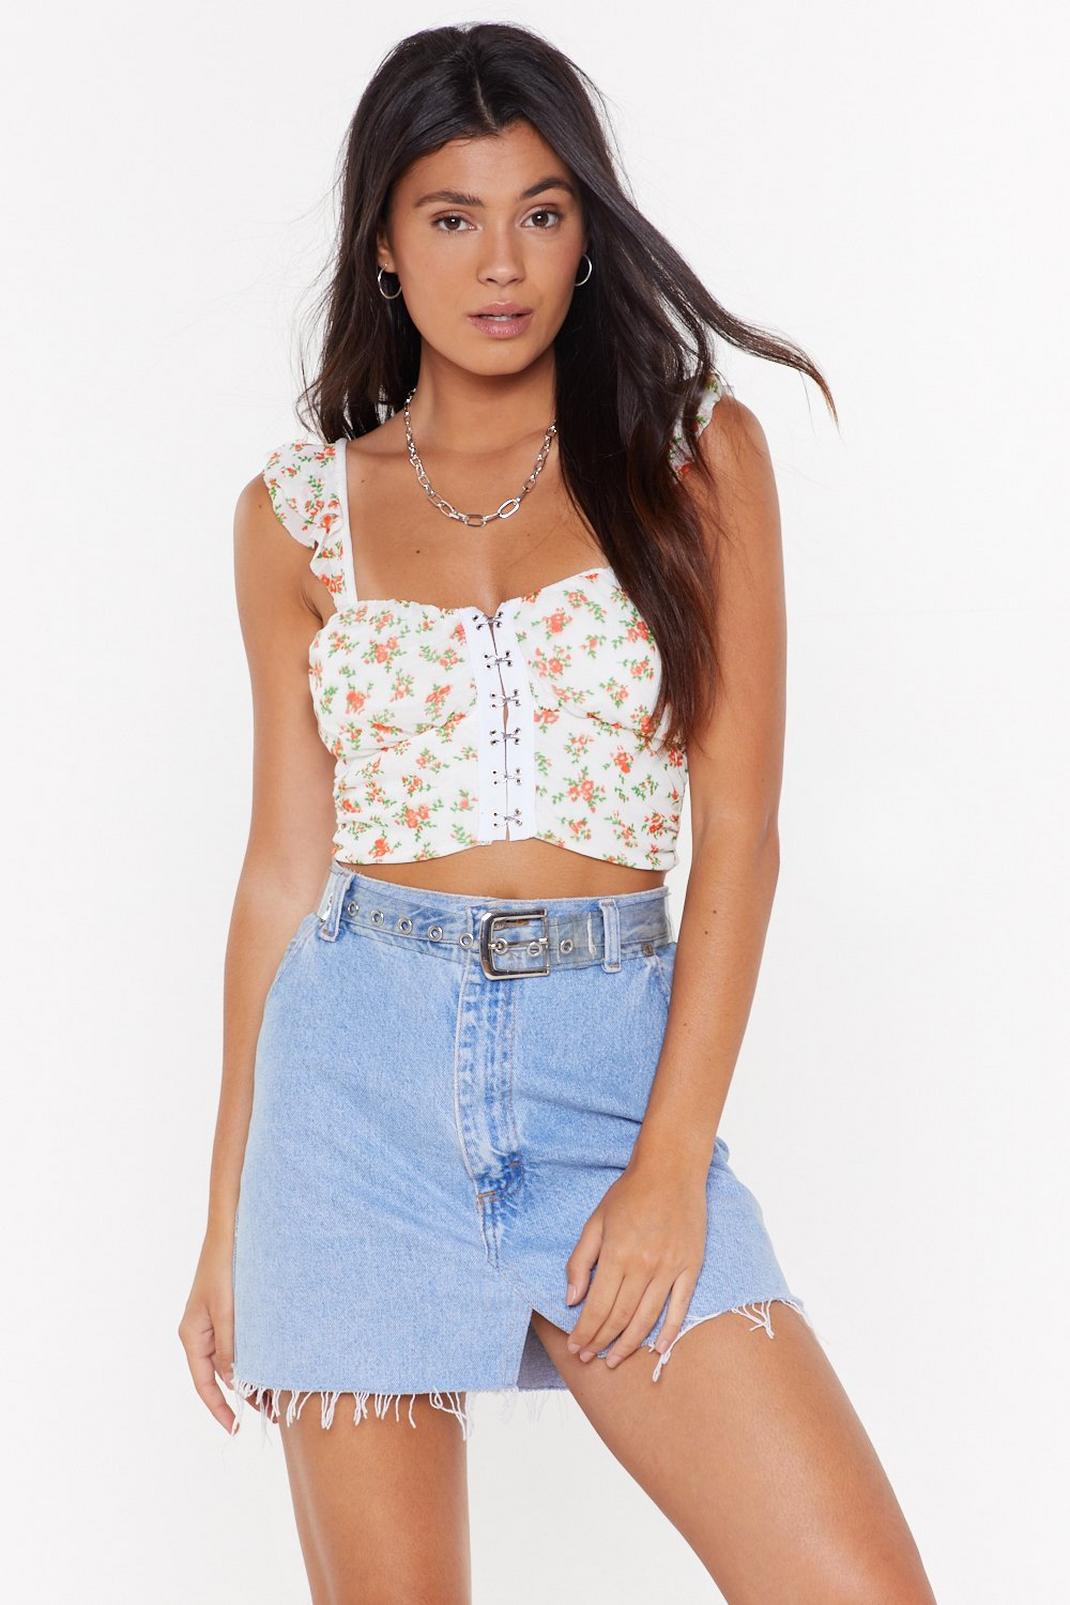 Hooked On a Feeling Floral Print Corset Crop Top in Red